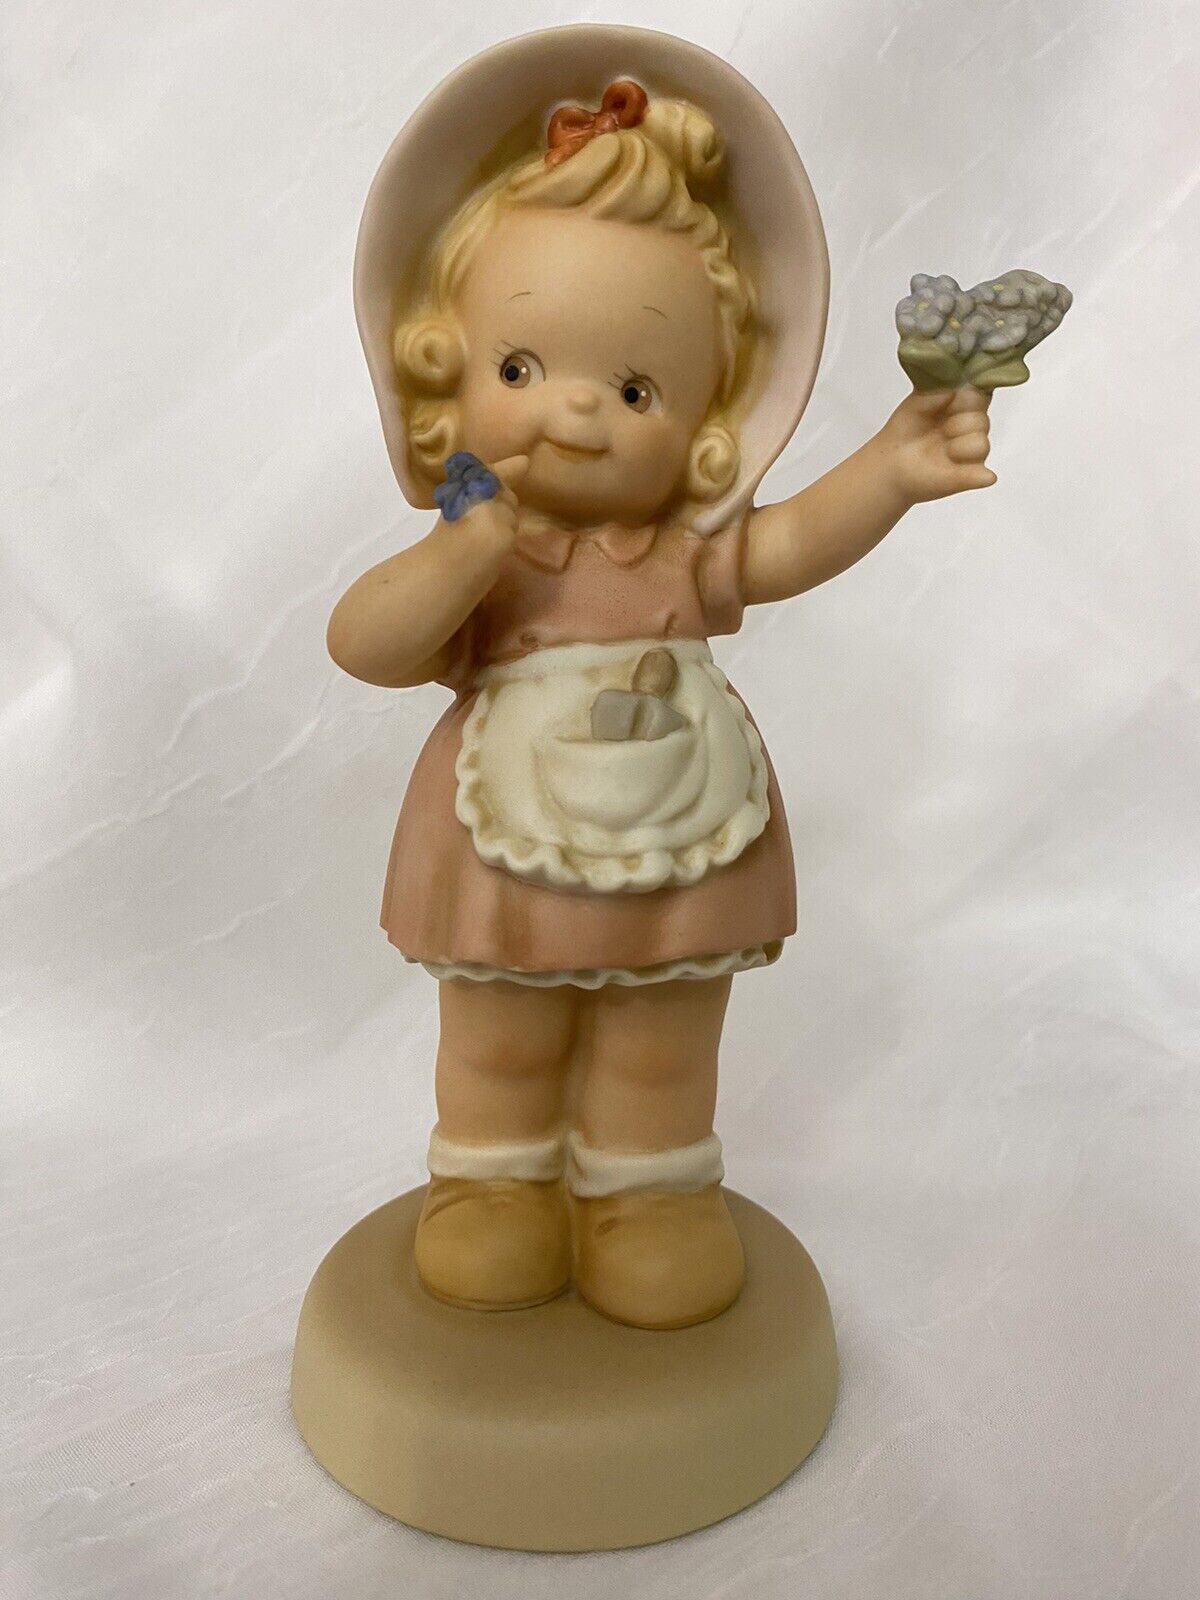 Vintage Memories of Yesterday 1995 Forget Me Not 50006 Girl in a Bonnet